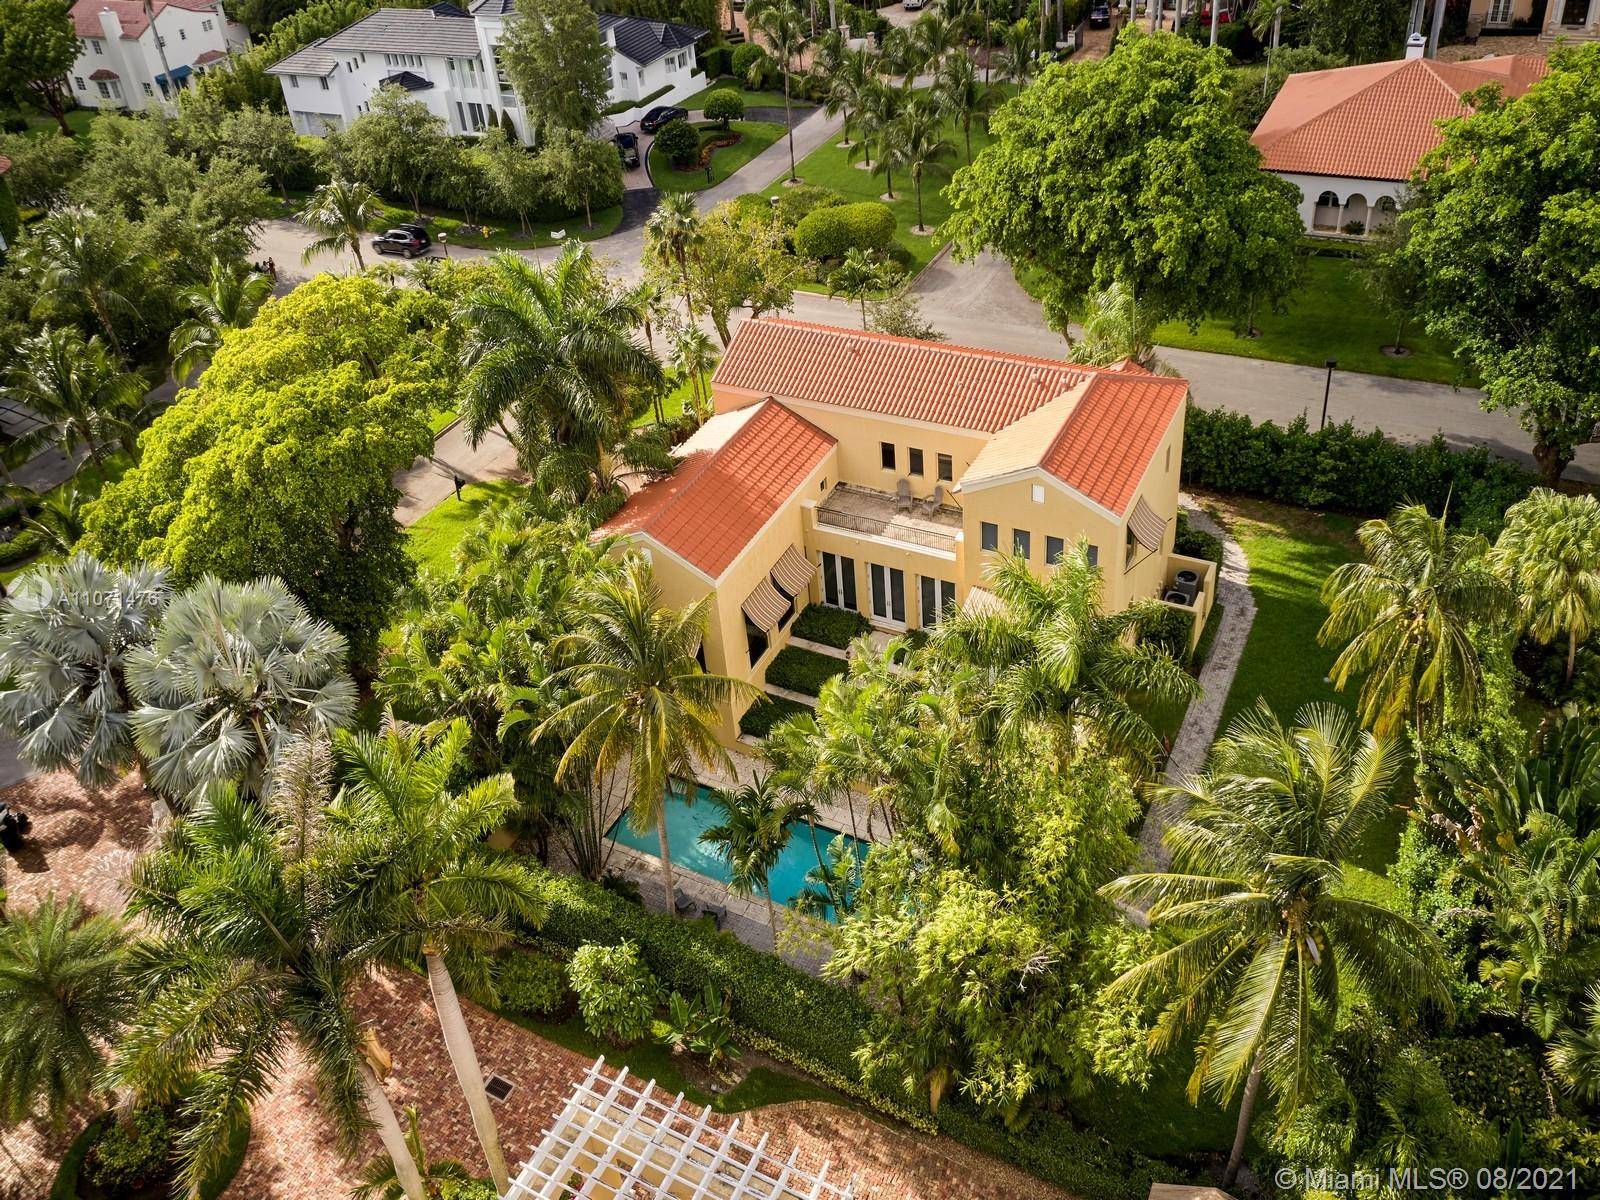 This elegant Mediterranean style home sits in a cul de sac on a corner lot in Islands of Cocoplum, one of Coral Gable s most exclusive GATED communities.